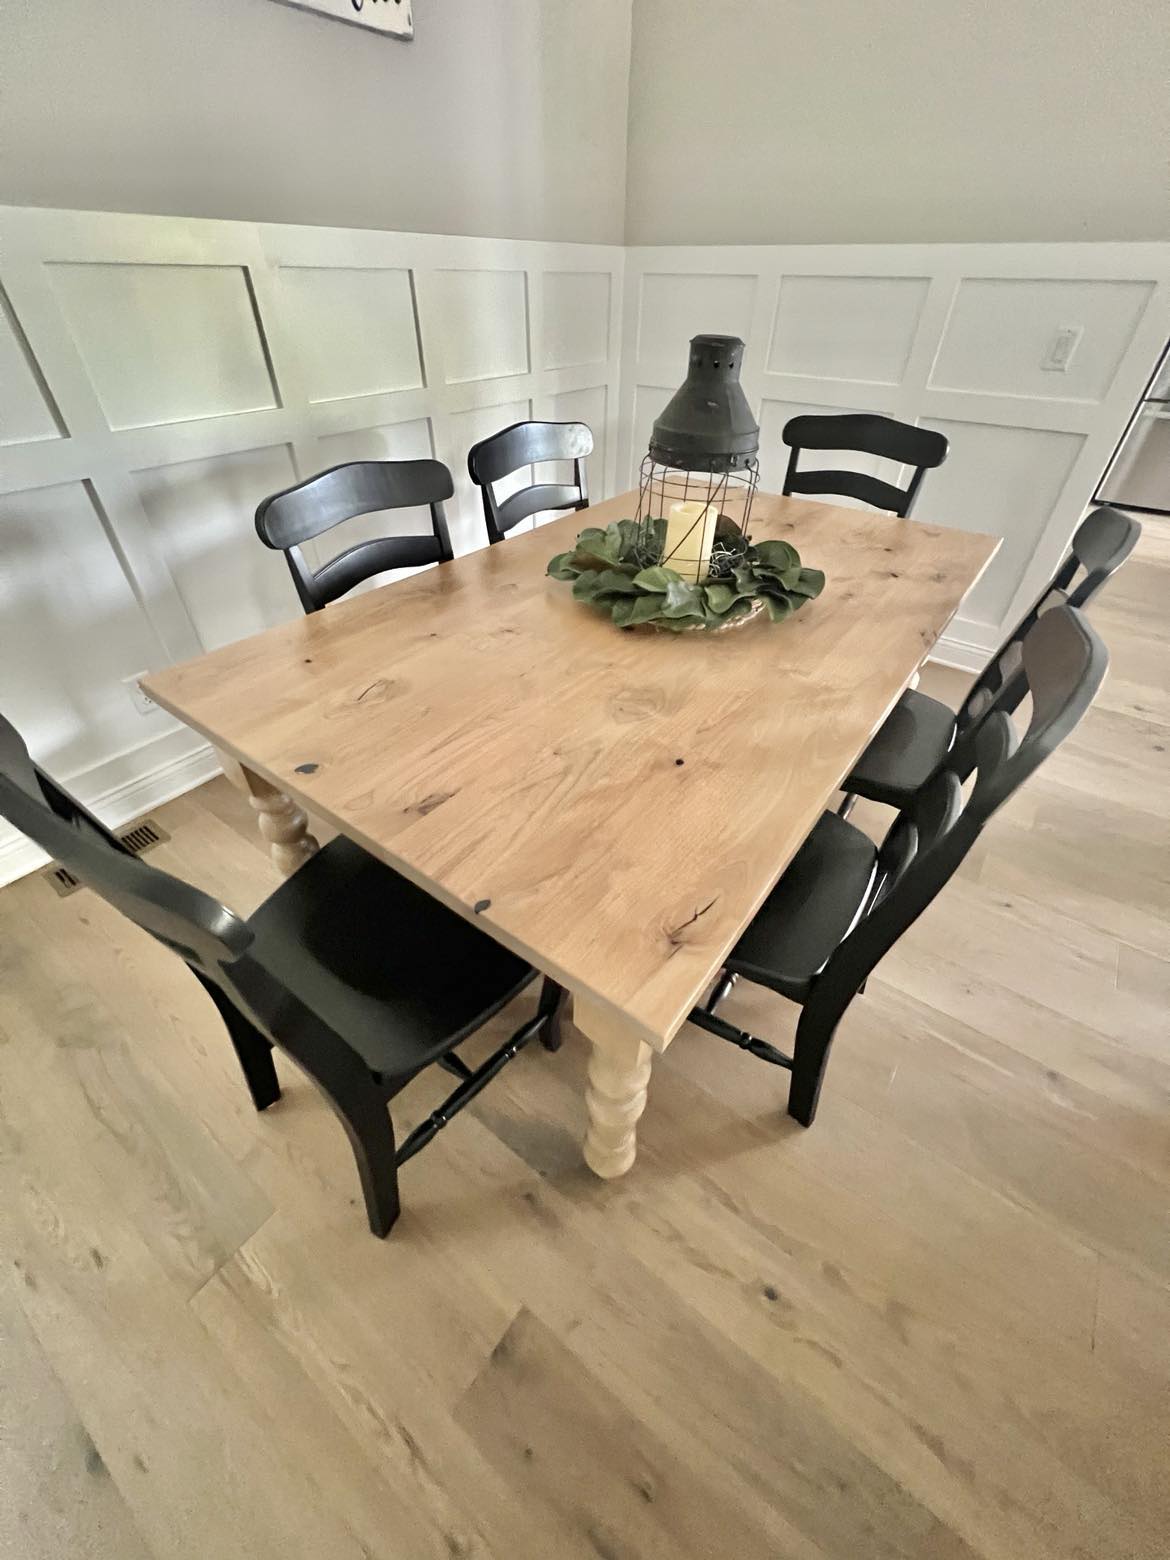 6' L x 42" W Rustic Alder Traditional Husky Dining Table with 6 Country Cottage Chairs